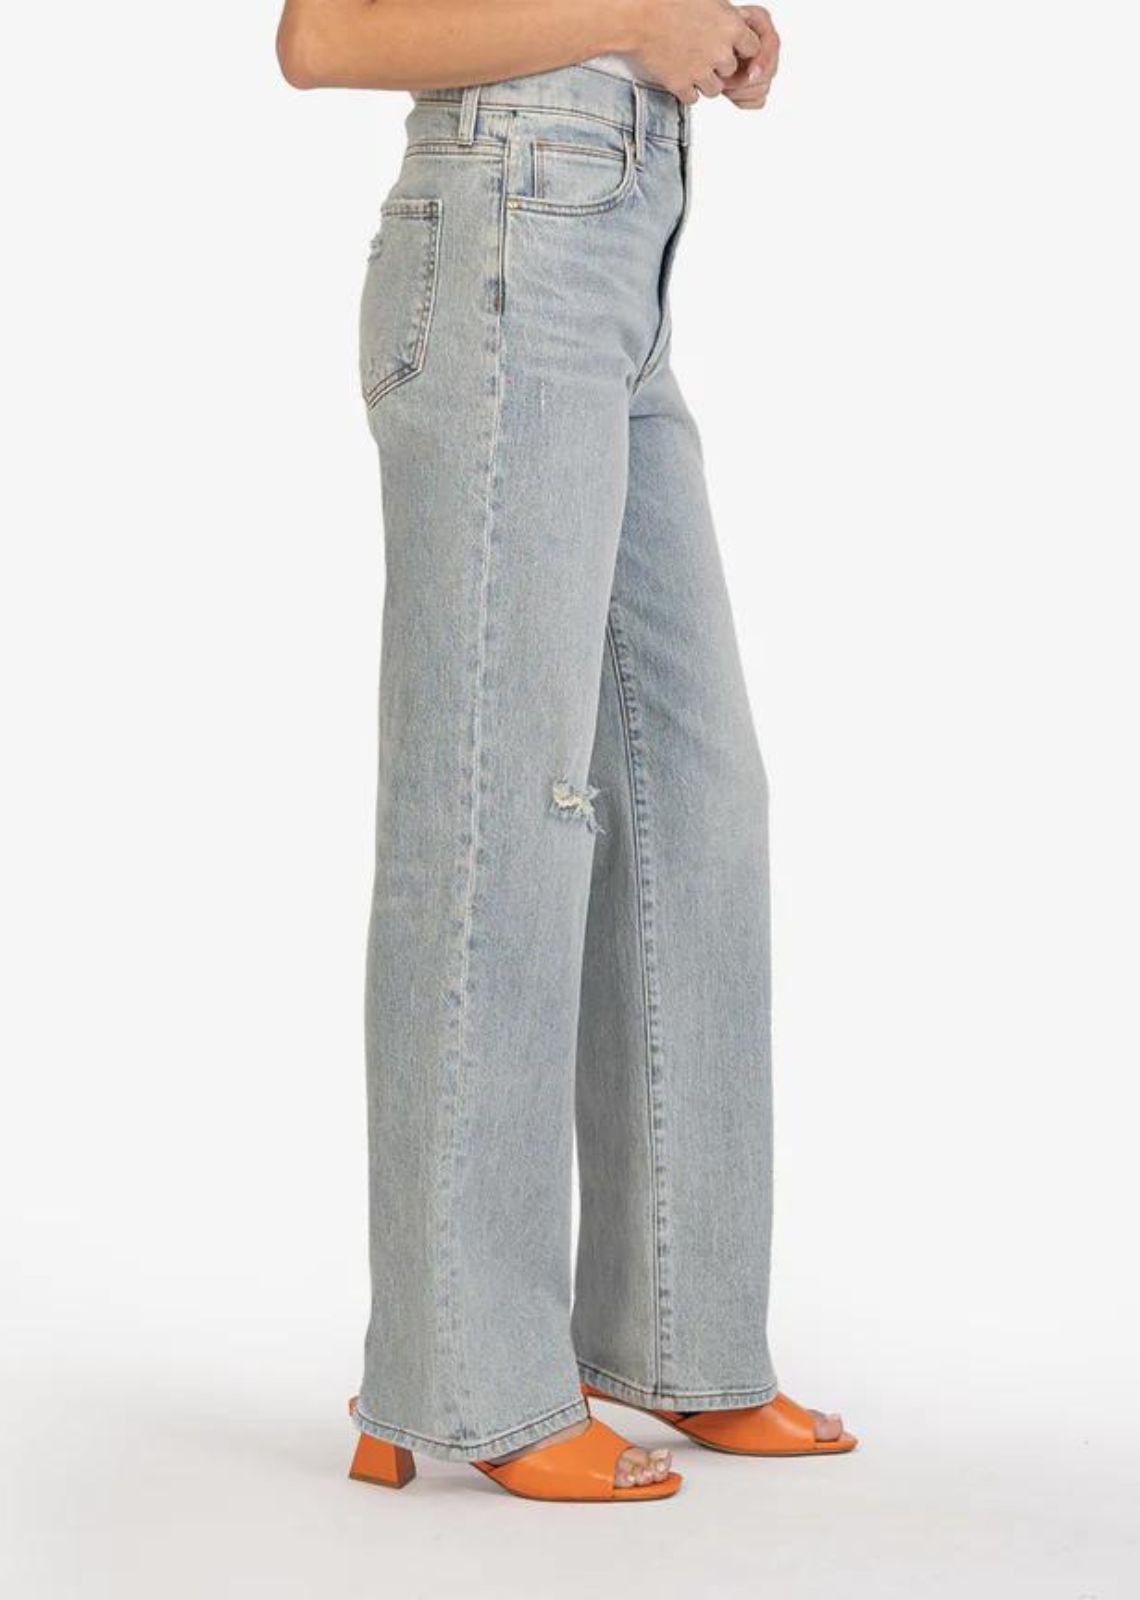 Kut From The Kloth Sienna High Rise Wide Leg - Dedication. Add a throwback vibe to your casual look with full-length wide-leg jeans made from low-stretch denim in a well-loved light wash.